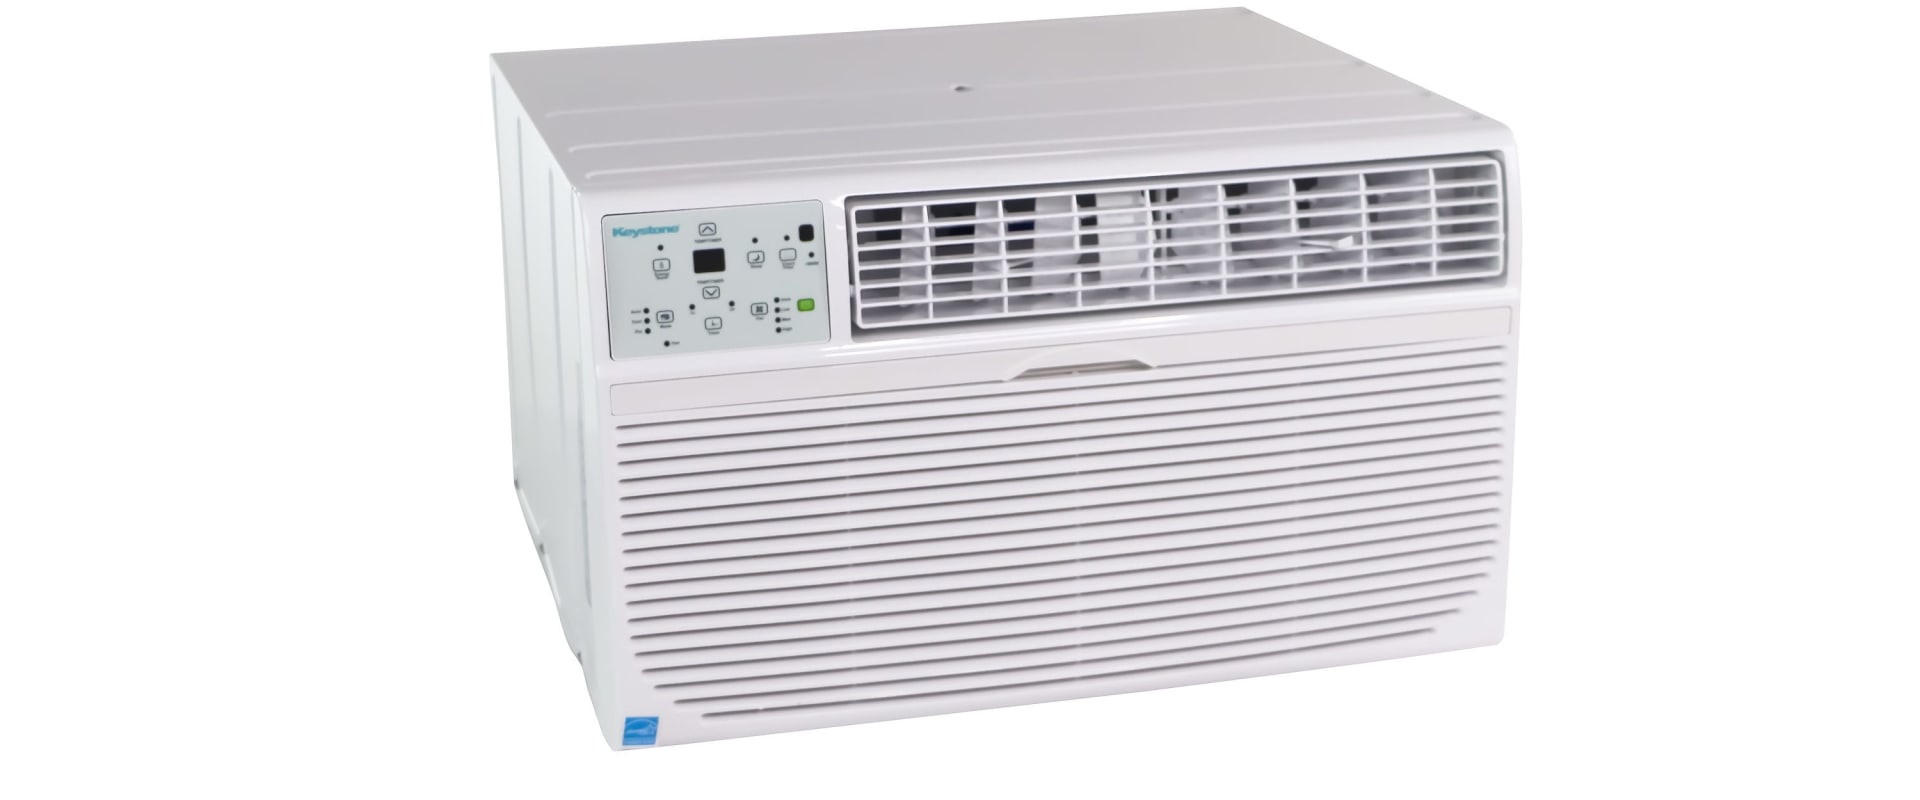 Discover the Quietest Air Conditioners for Your Home